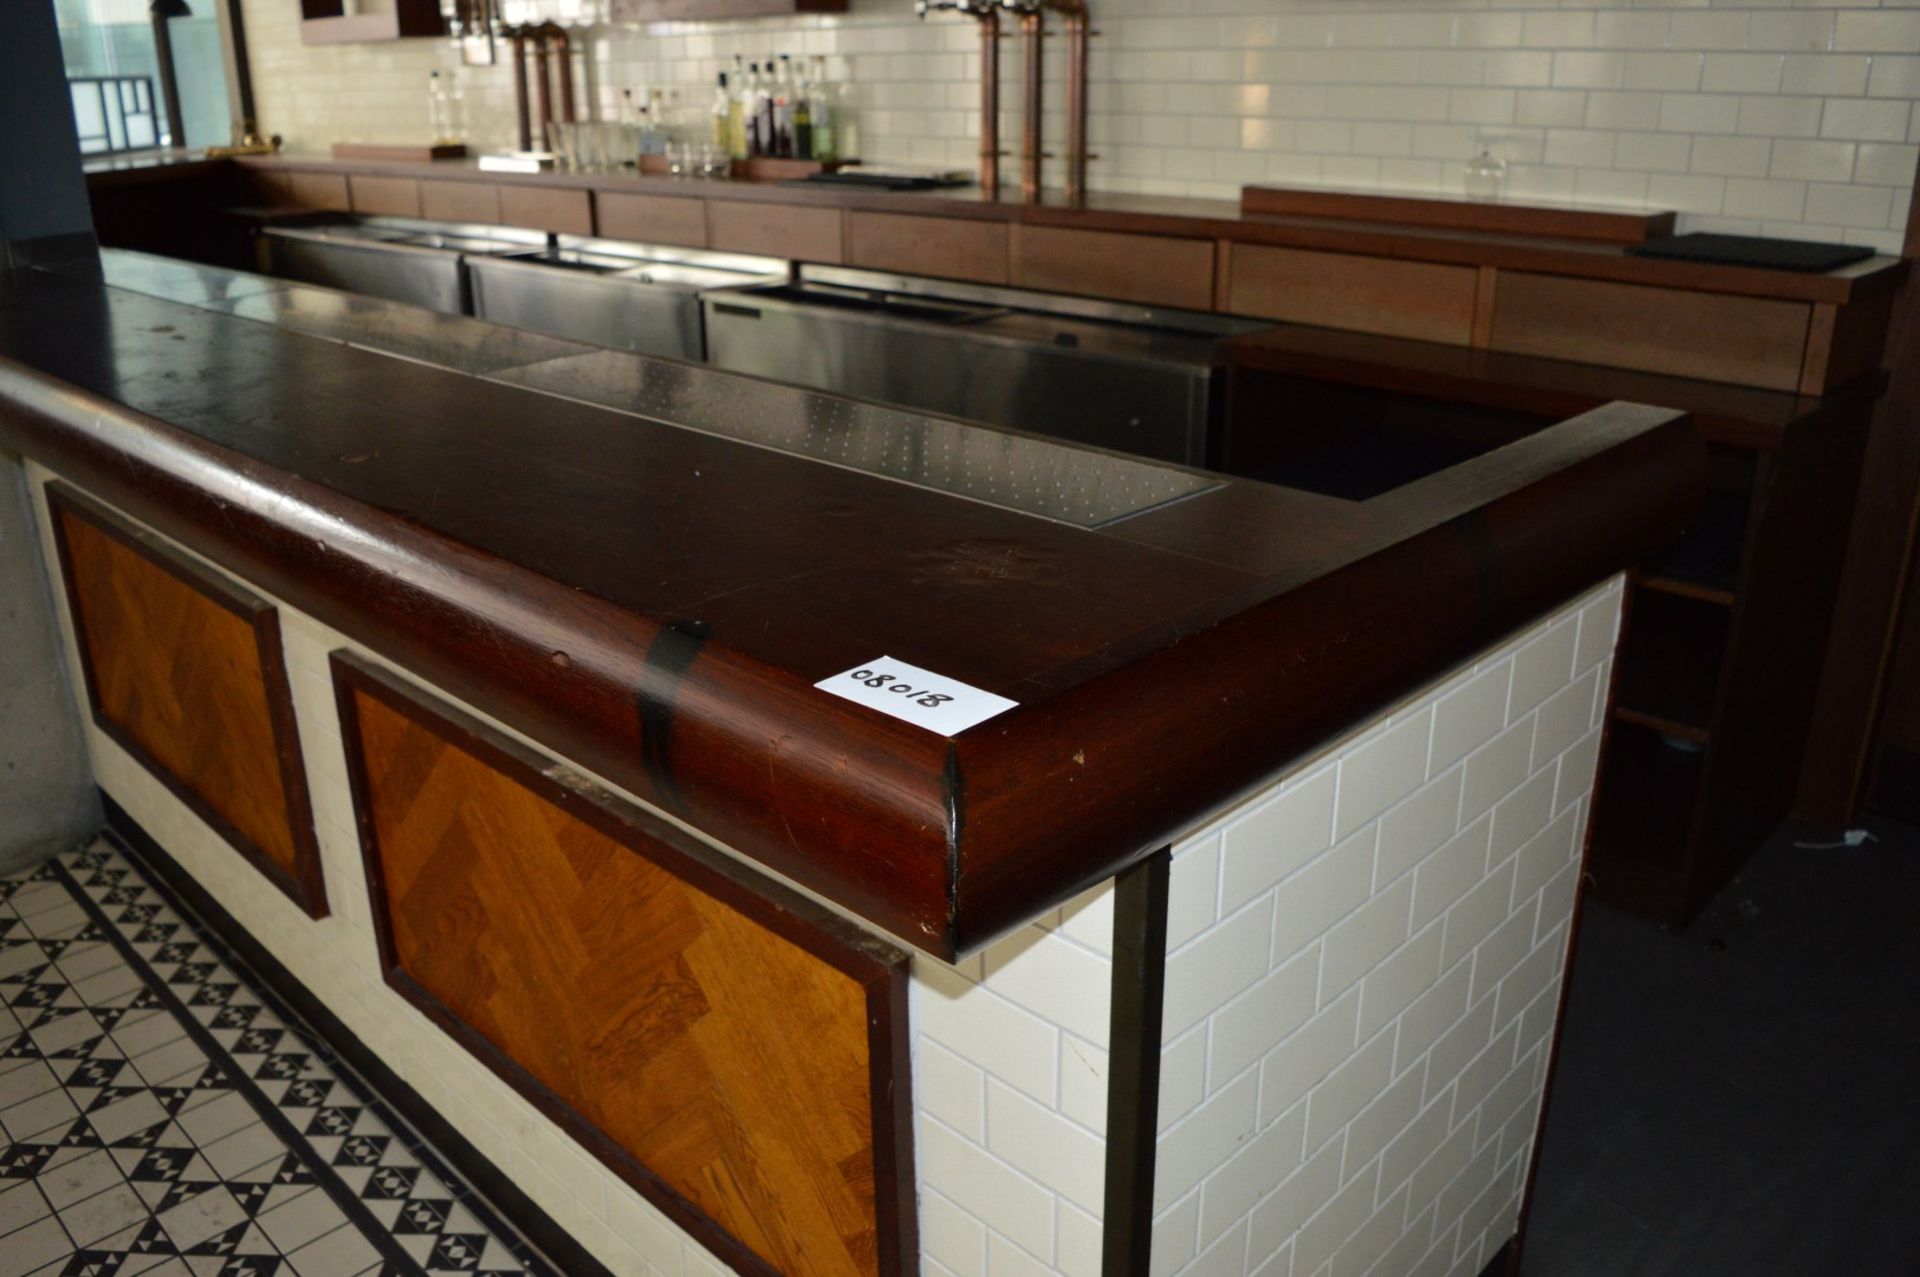 1 x Large Pub / Restuarant Bar With Tiled Front and Framed Parquet Flooring Design - Also Includes - Image 11 of 25